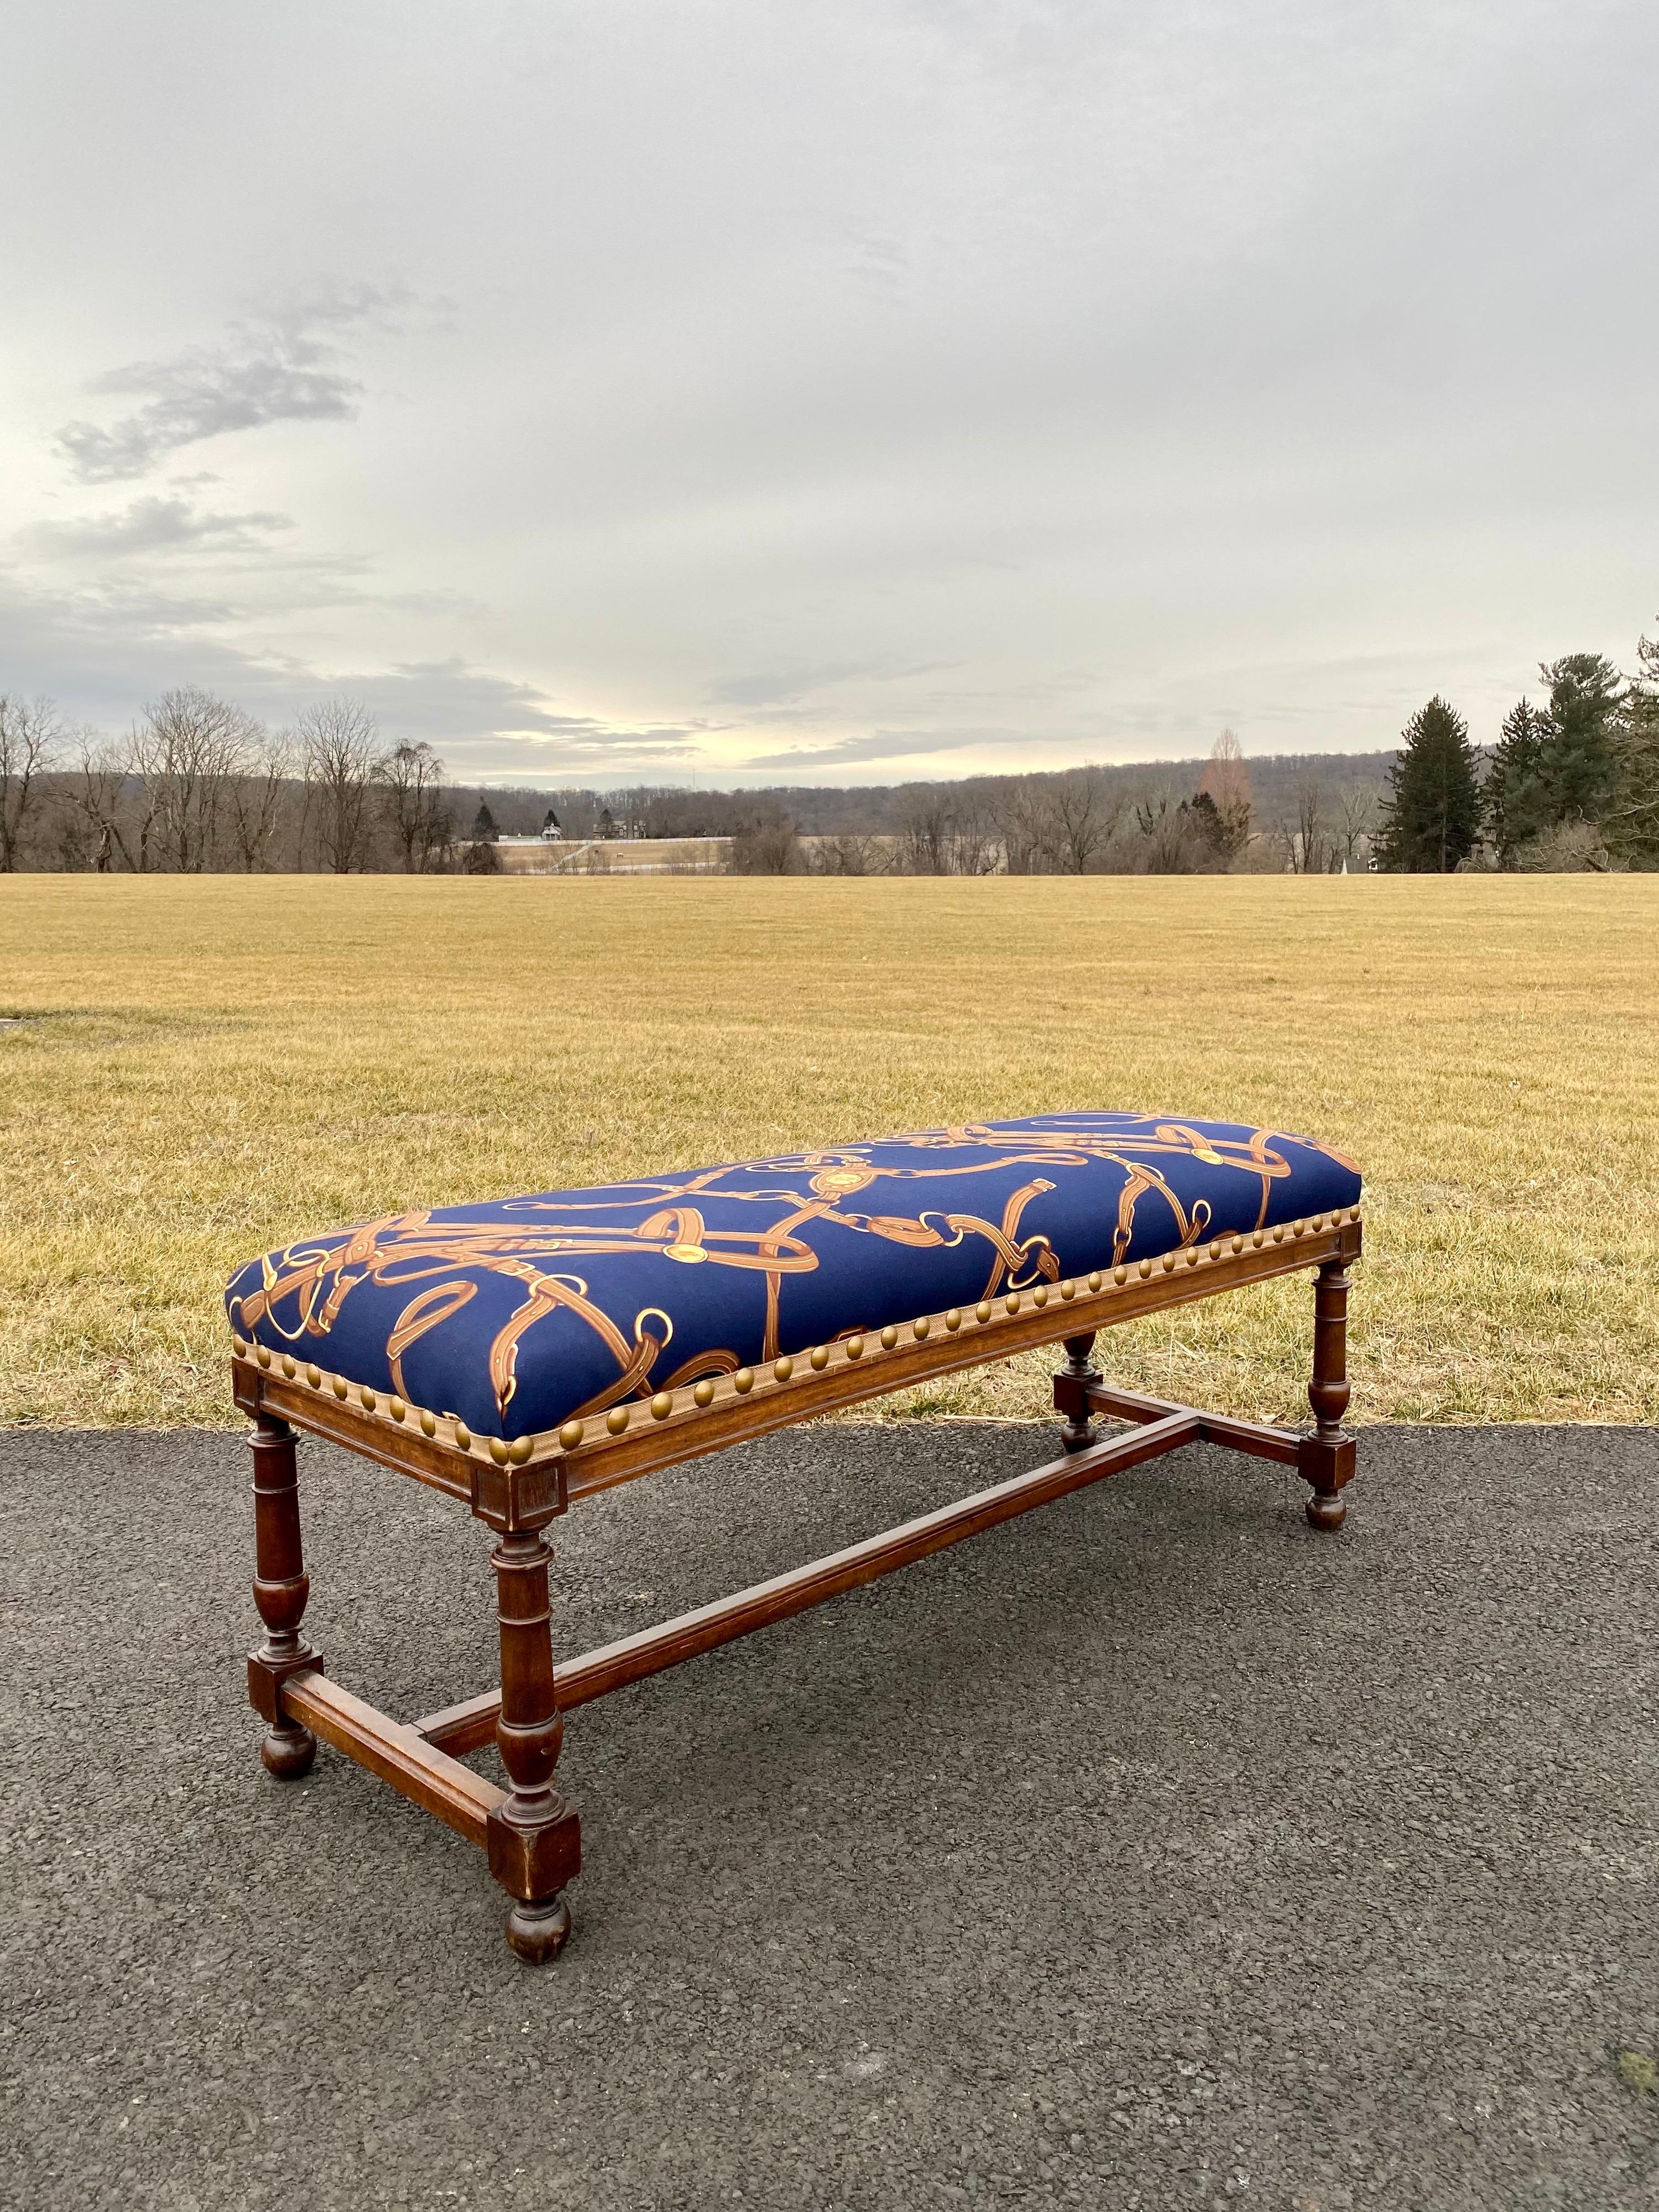 Classic vintage wood frame bench with wooden baluster turned legs and H-frame stretcher features professionally upholstered thick seating cushion with Ralph Lauren equestrian fabric with tangled horse bits and tacks. Cushion and fabric are soft and